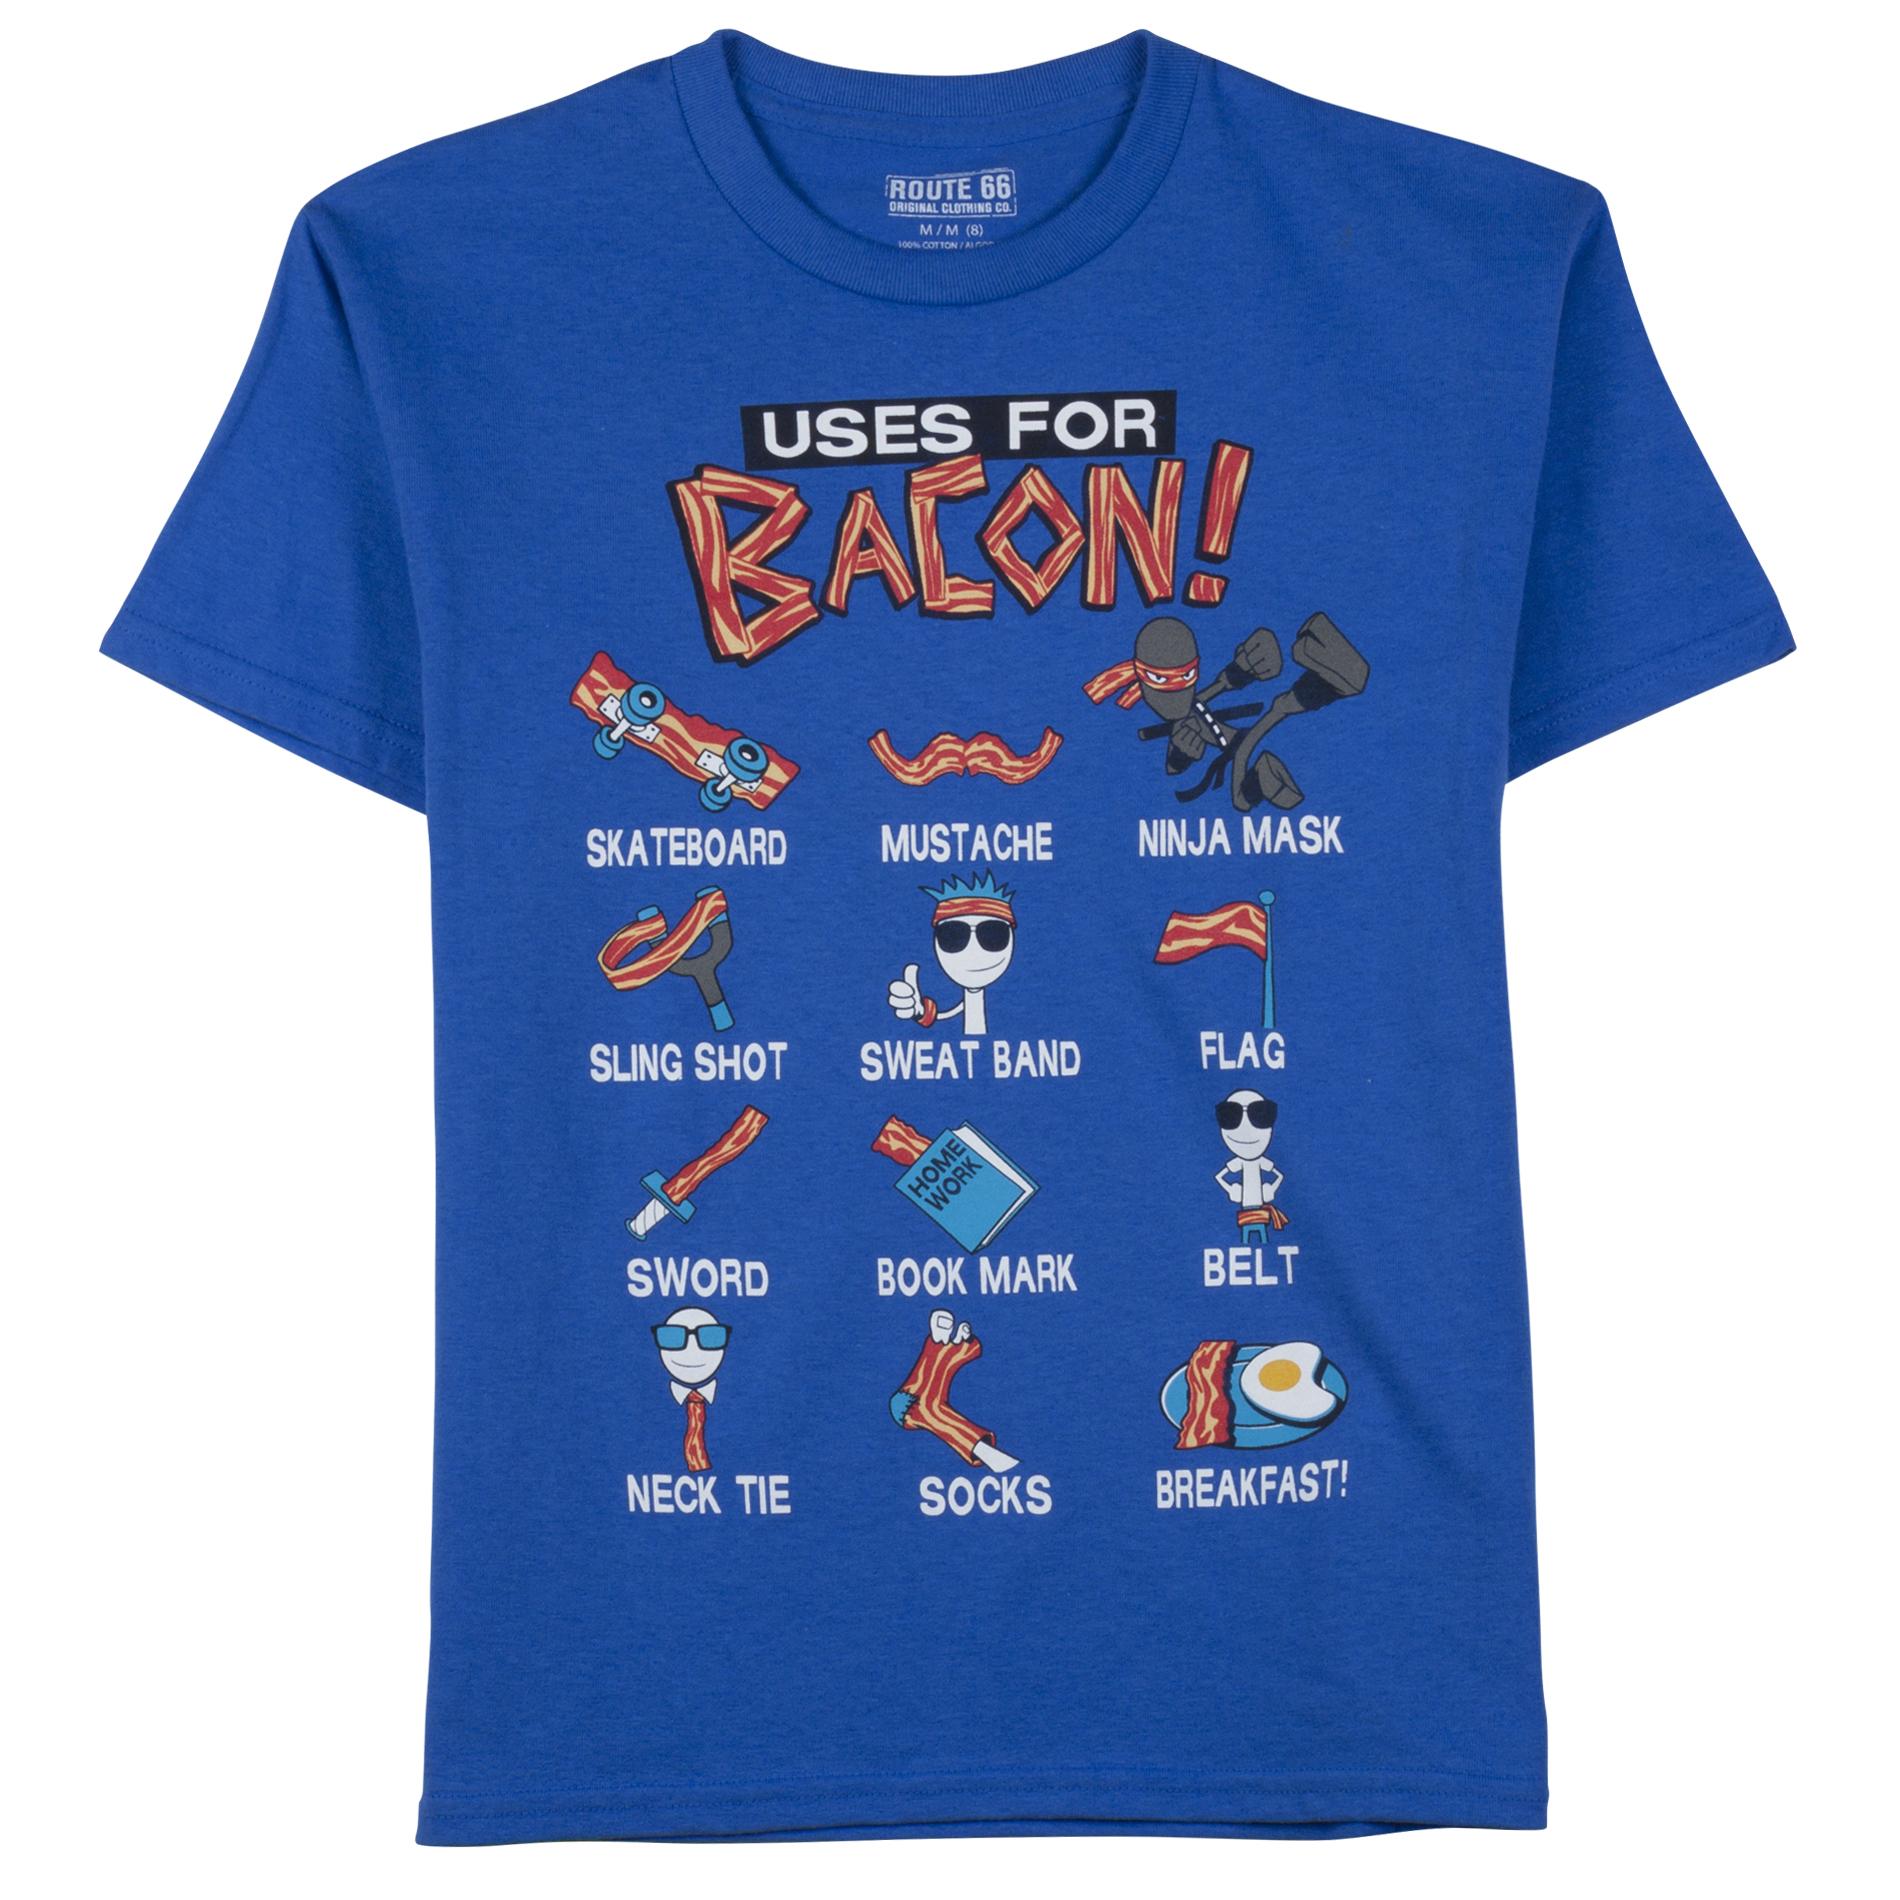 Route 66 Boy's Graphic T-Shirt - Uses For Bacon